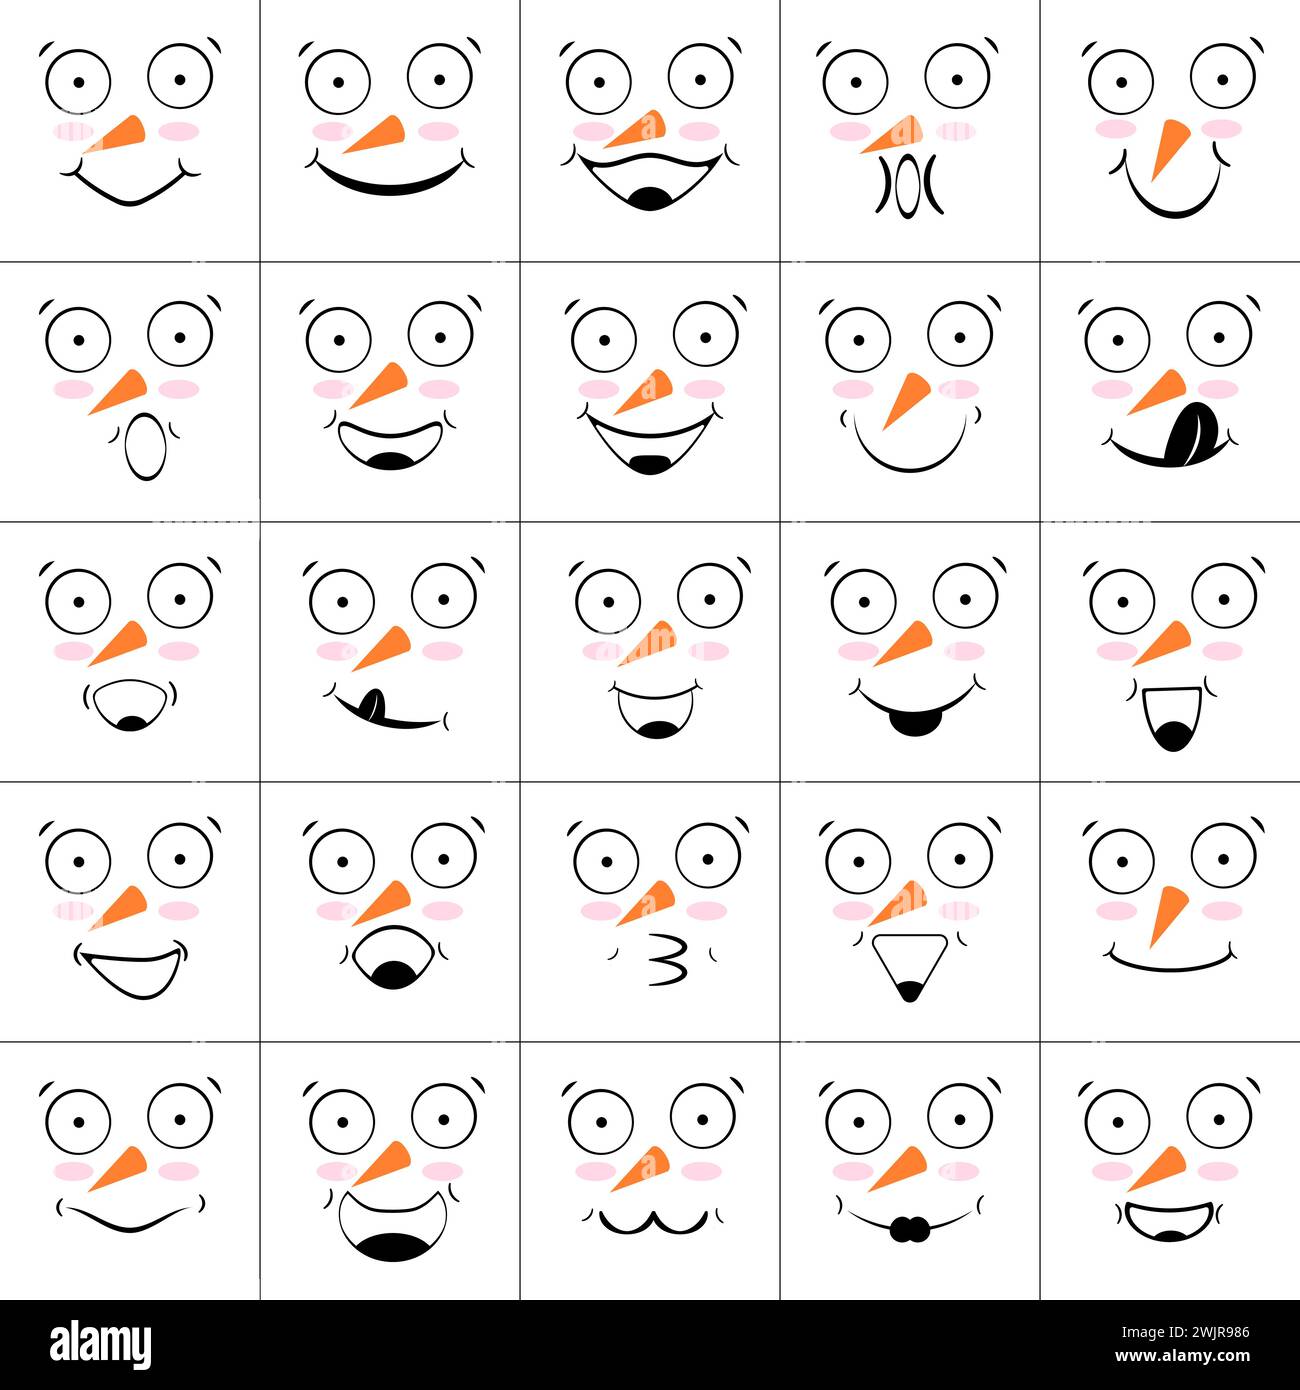 Set of faces of snowmen with smiles, laughter and nose with carrot. Collection of emoticons and emoji. Isolated vector illustrations, icons. Stock Vector